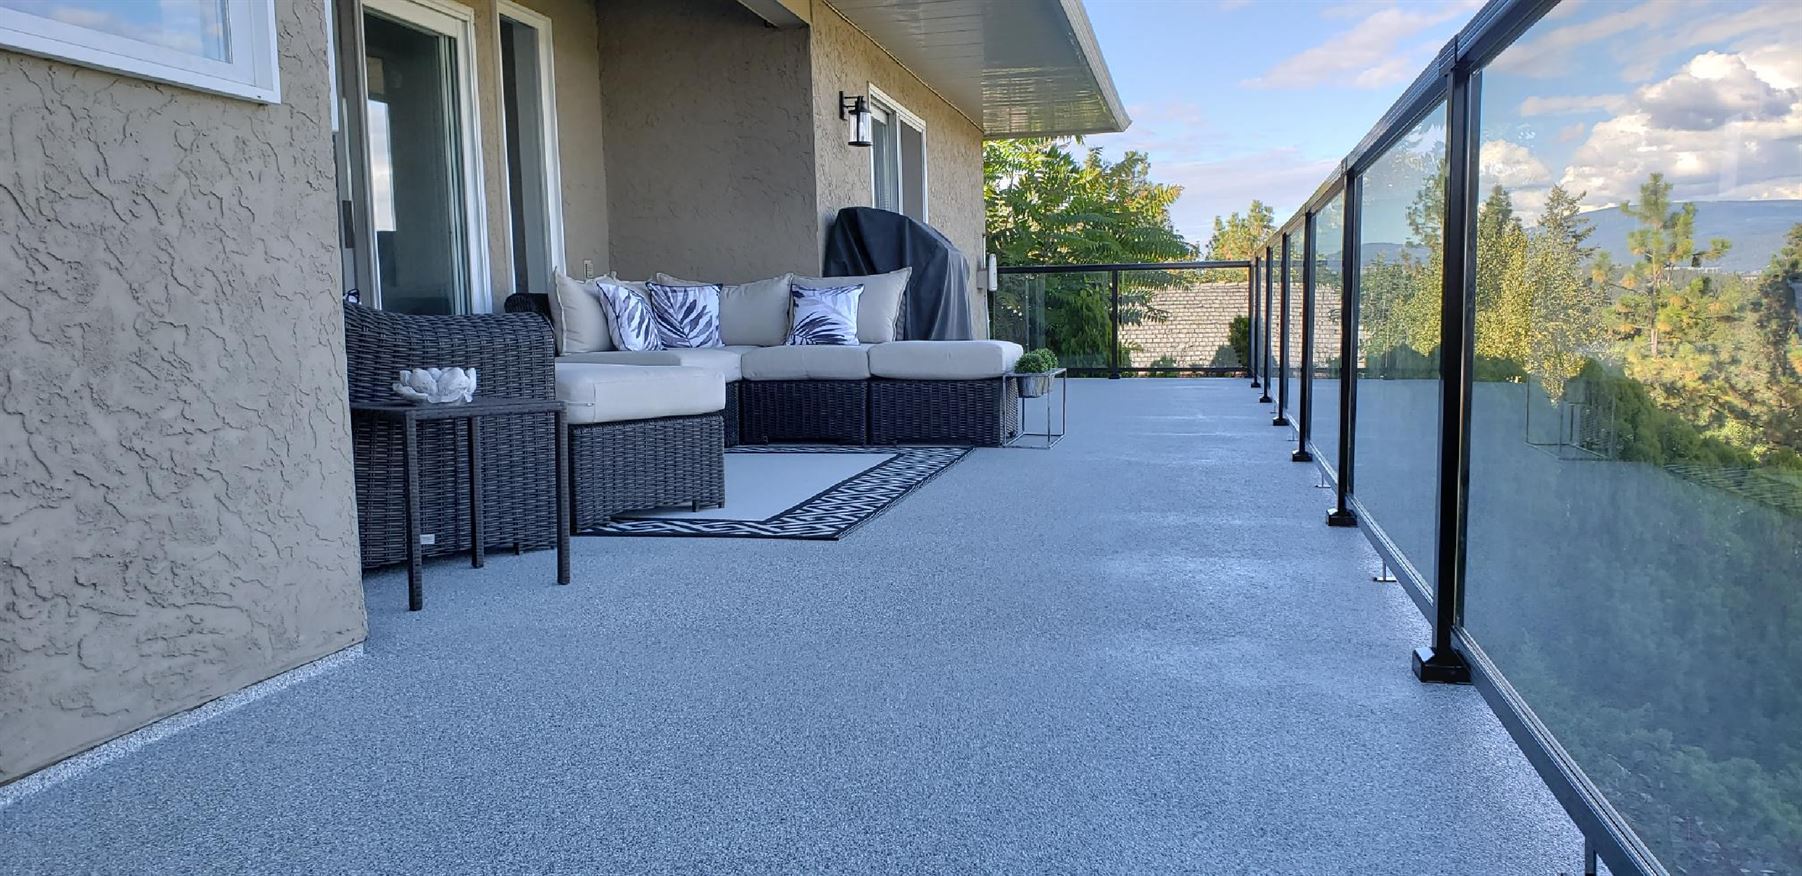 Edmonton Home Featuring Flexstone Coated Deck for Superior Weather Resistance